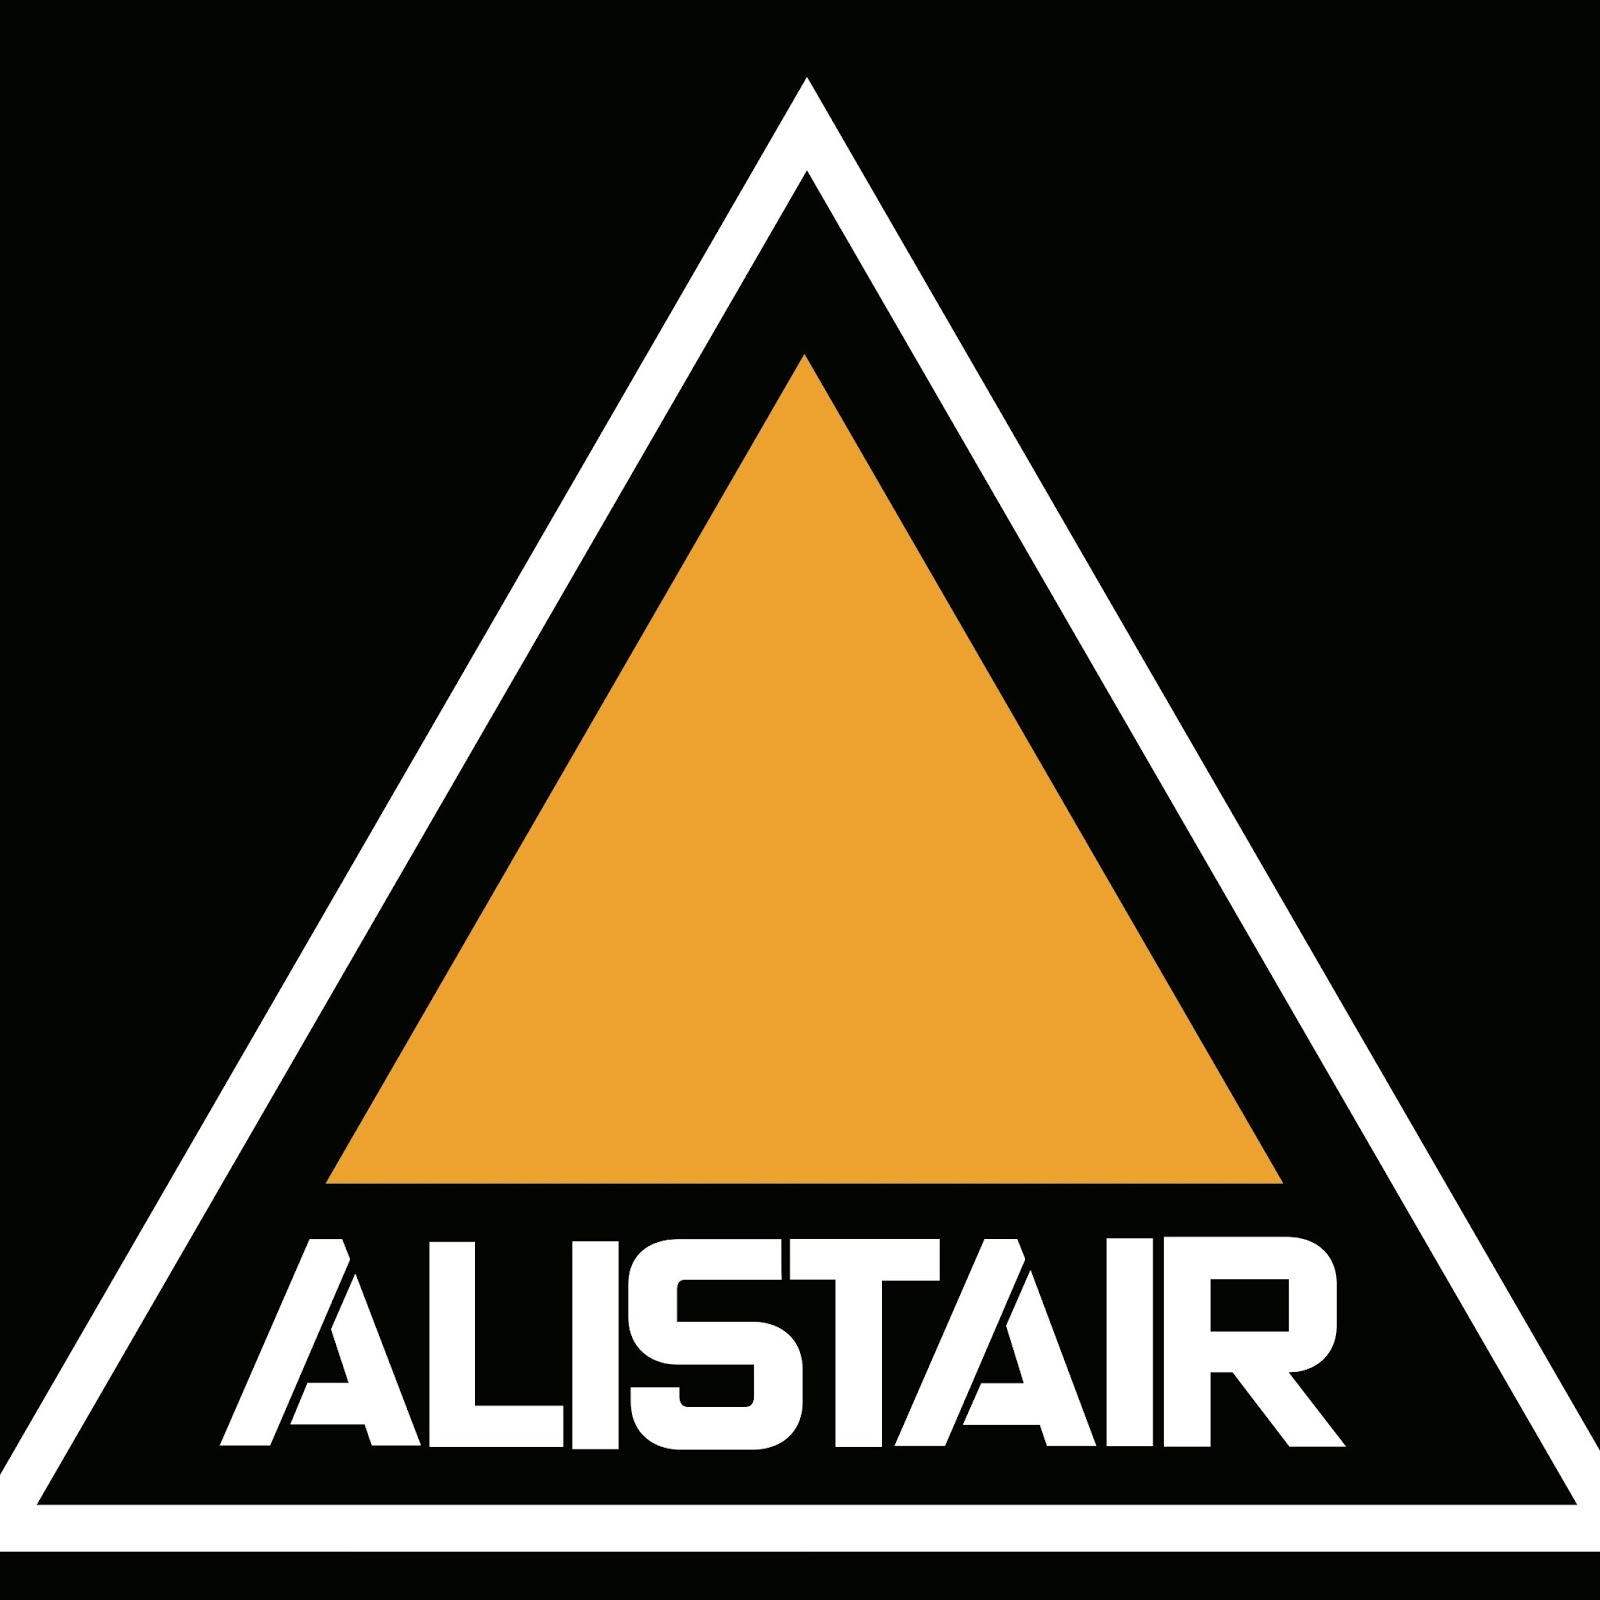 Port Clerk Job Opportunity at Alistair Group